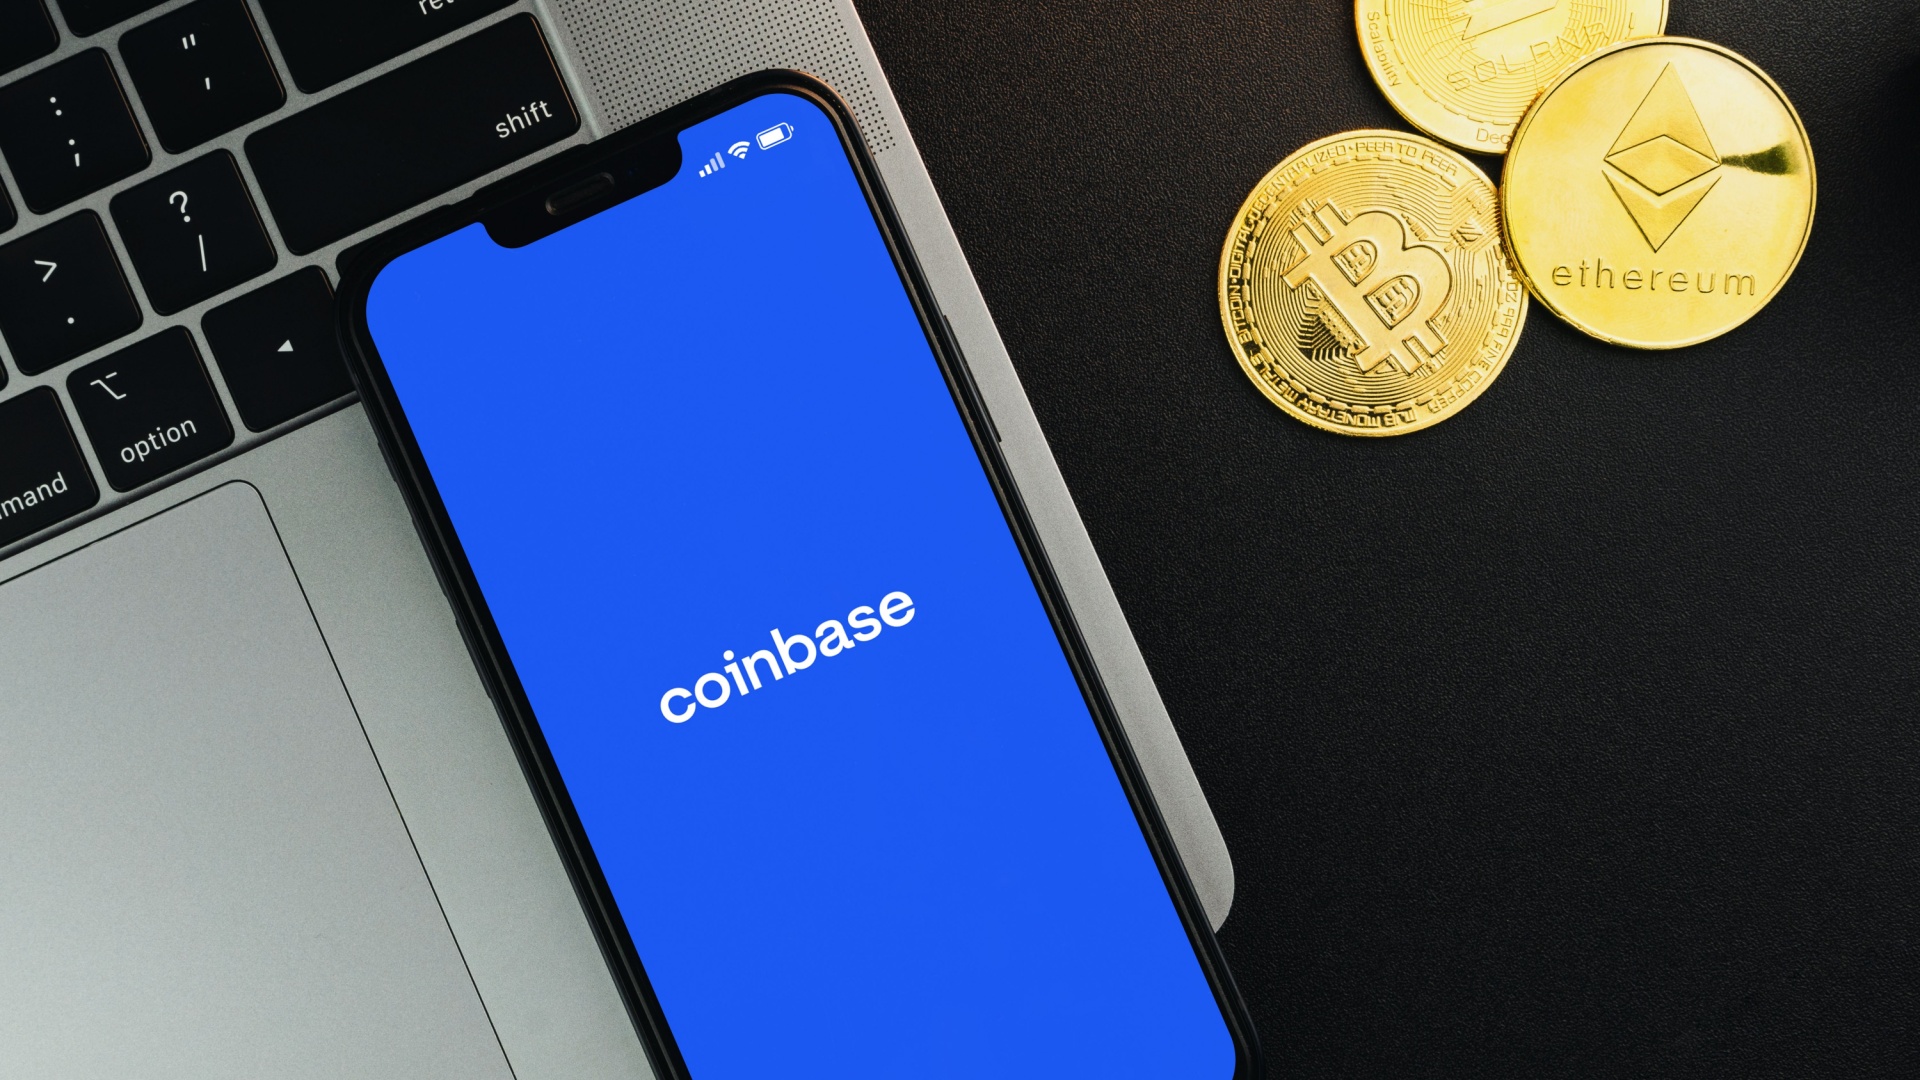 Bitcoin's Future Determined by These Factors According to Coinbase Analysis